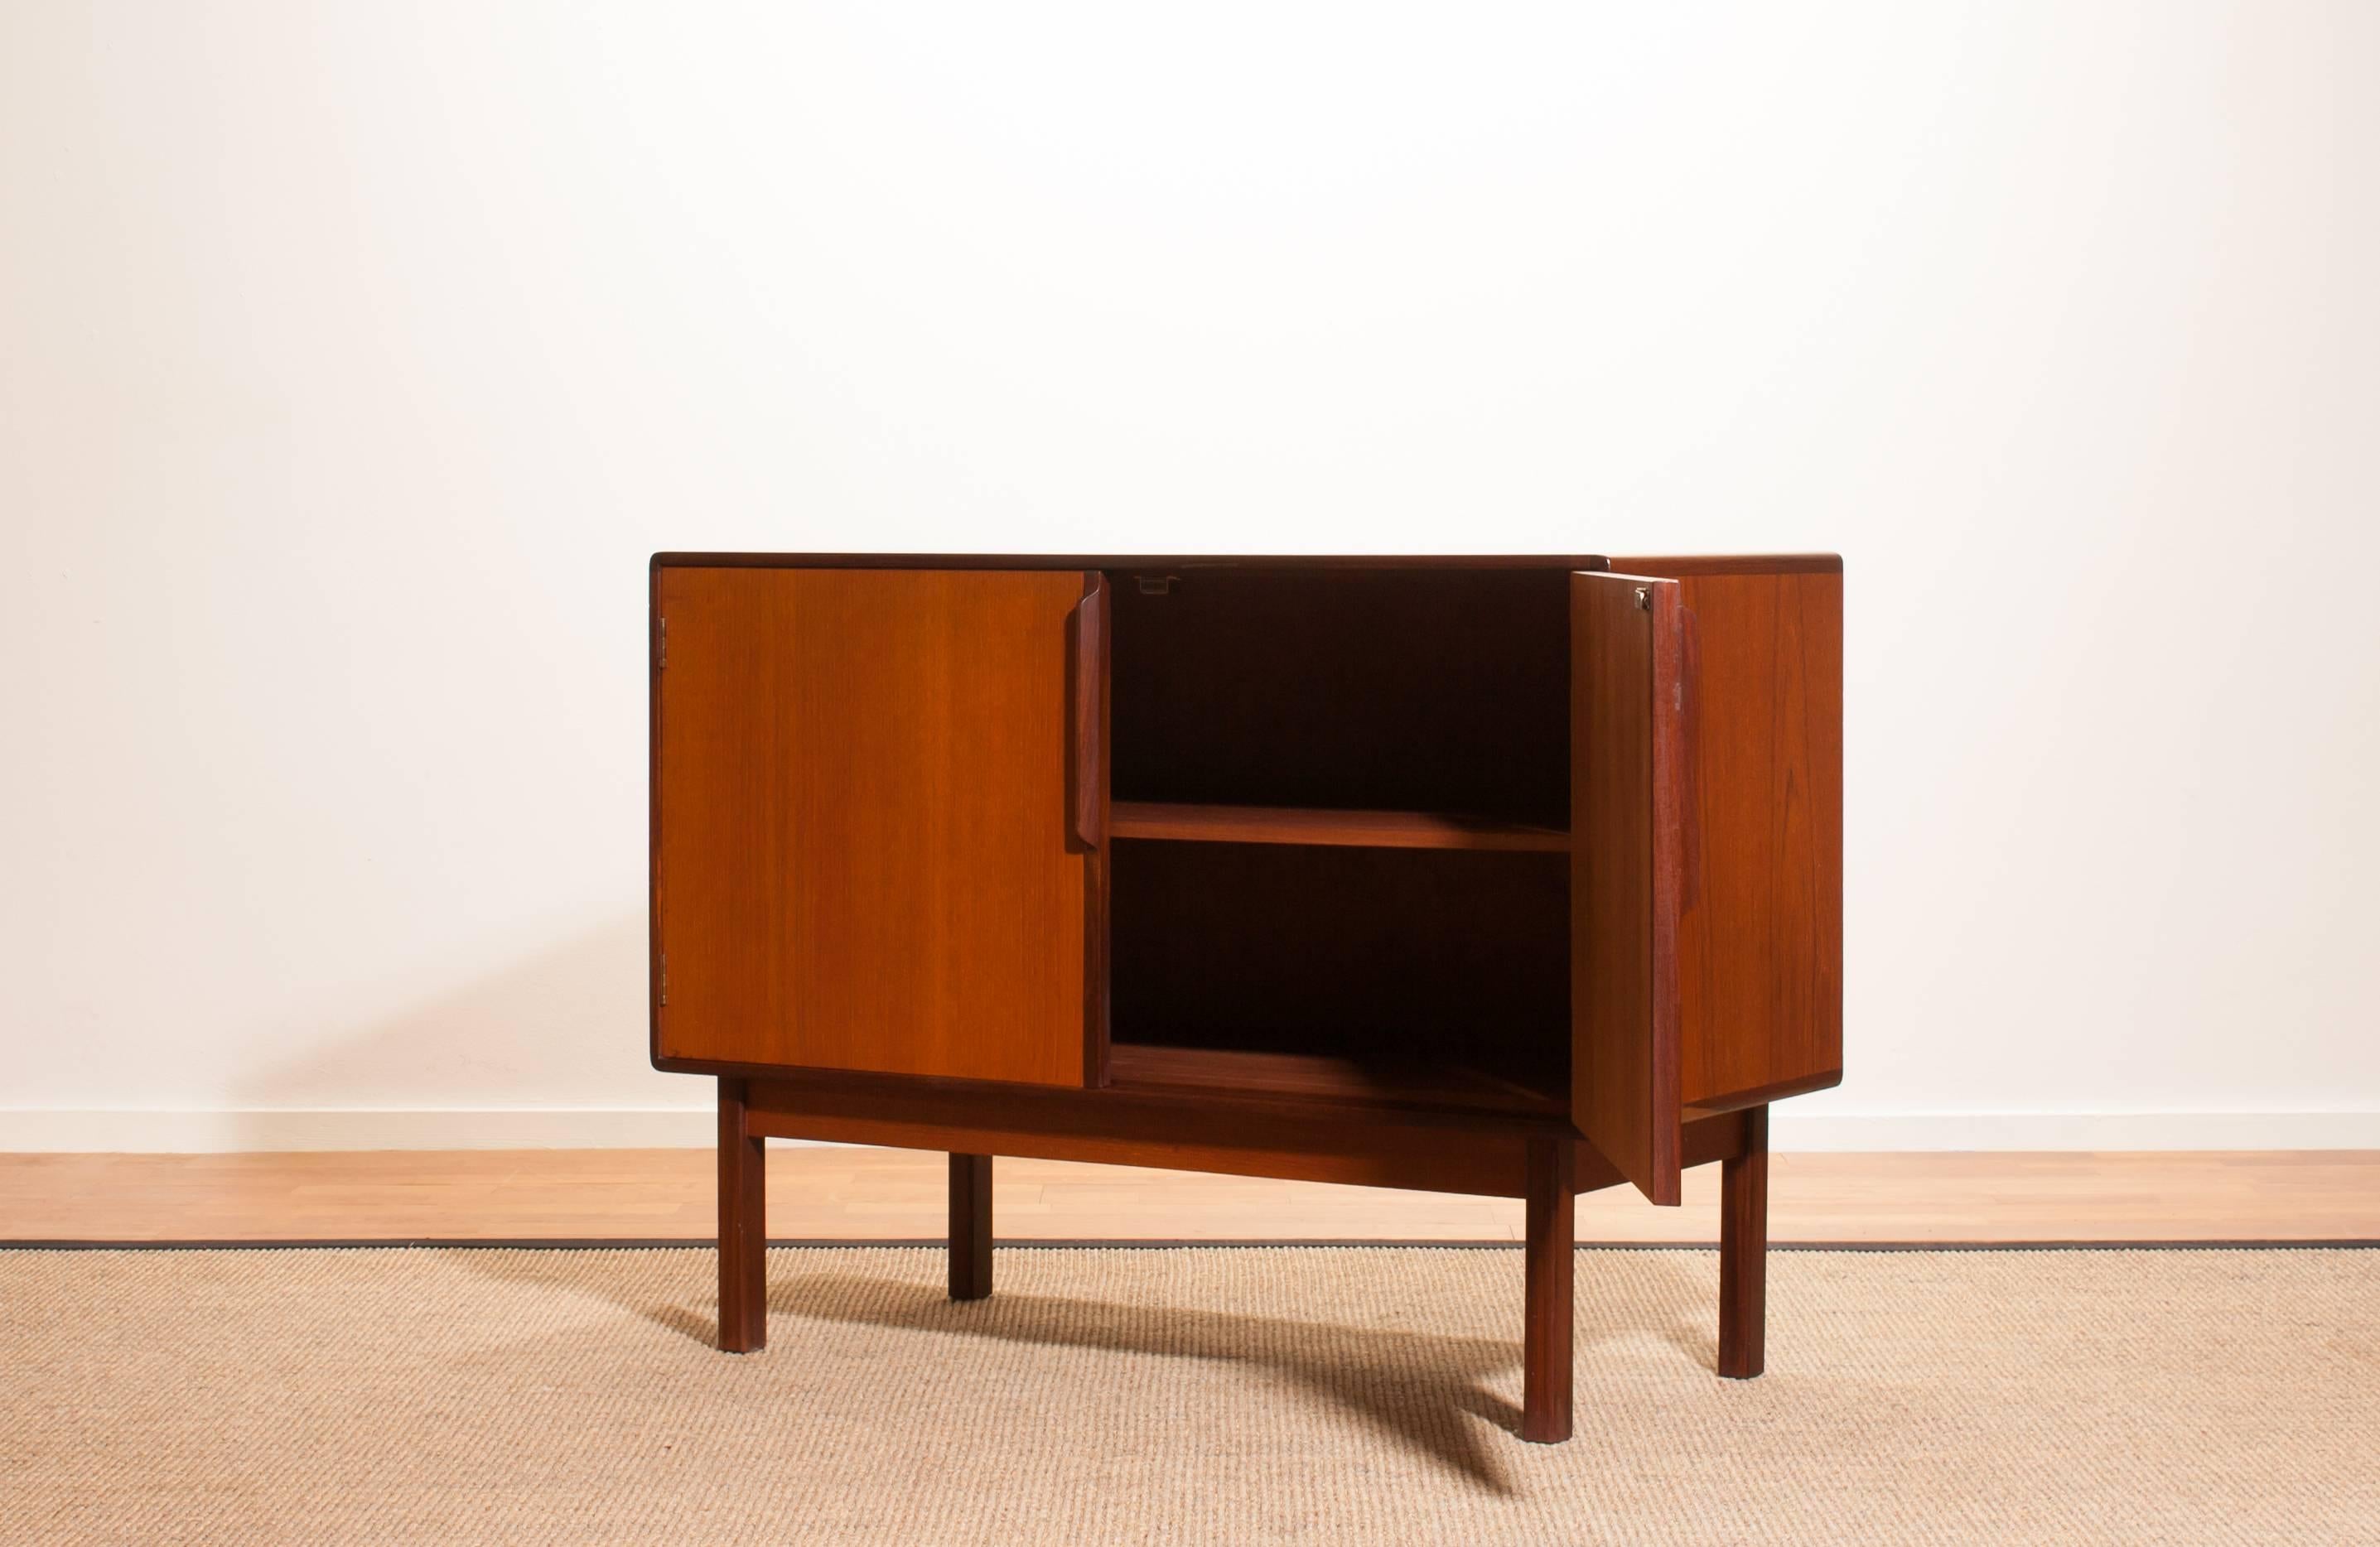 Beautiful small sideboard made by Asko Finland.
This cabinet is made of teak and palisander and in a wonderful condition.
It has two doors and a shelf inside.
Period 1960s
Dimension H 73 cm, W 97 cm, D 45 cm.